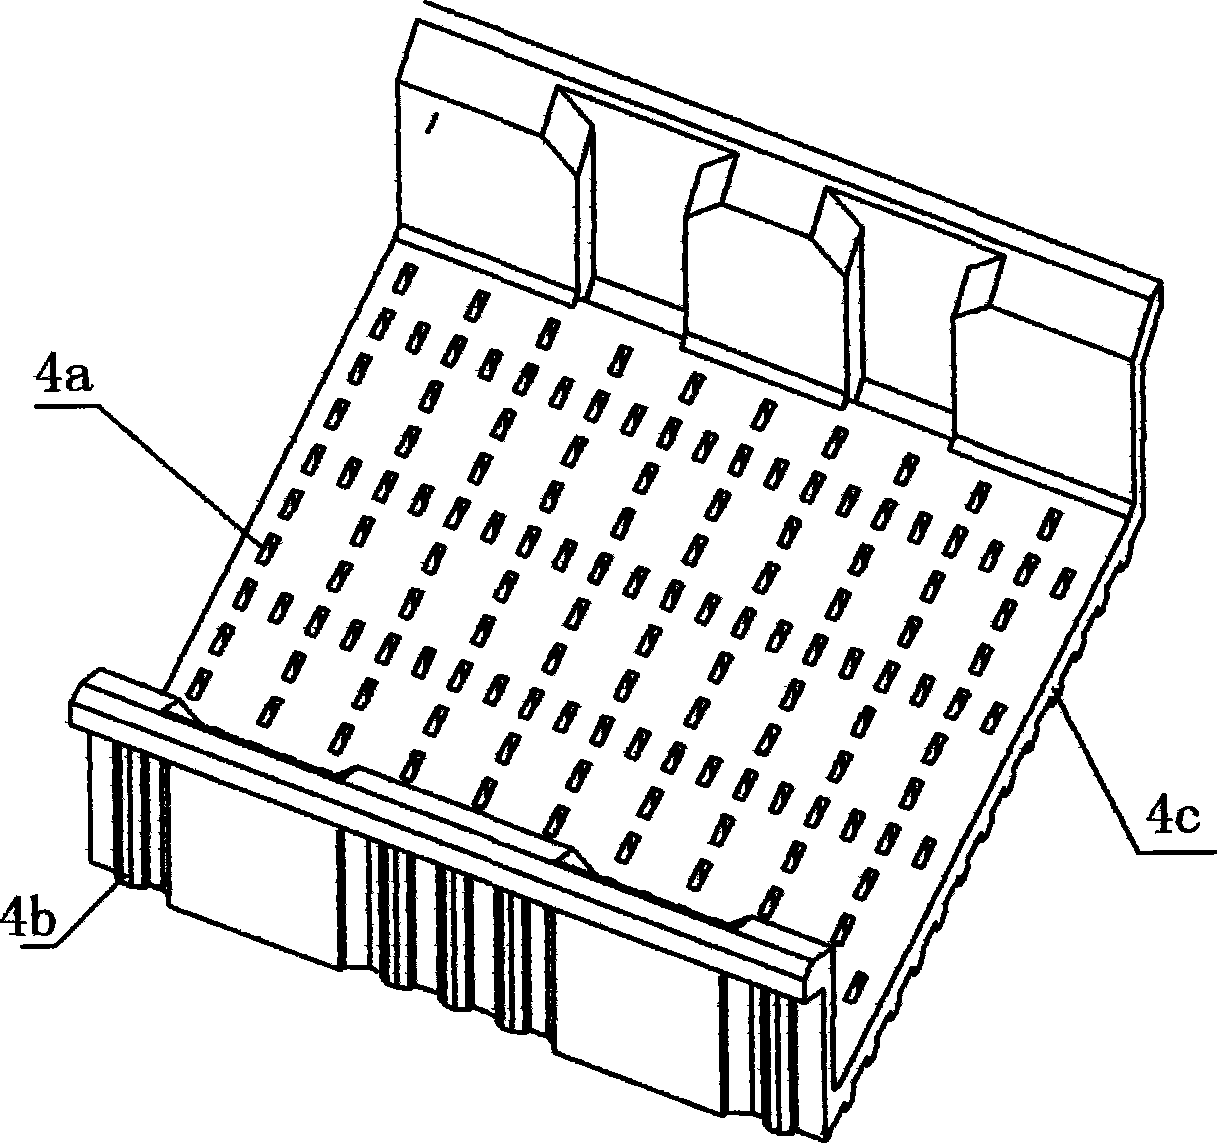 High-speed high-density connector with central shielding needle